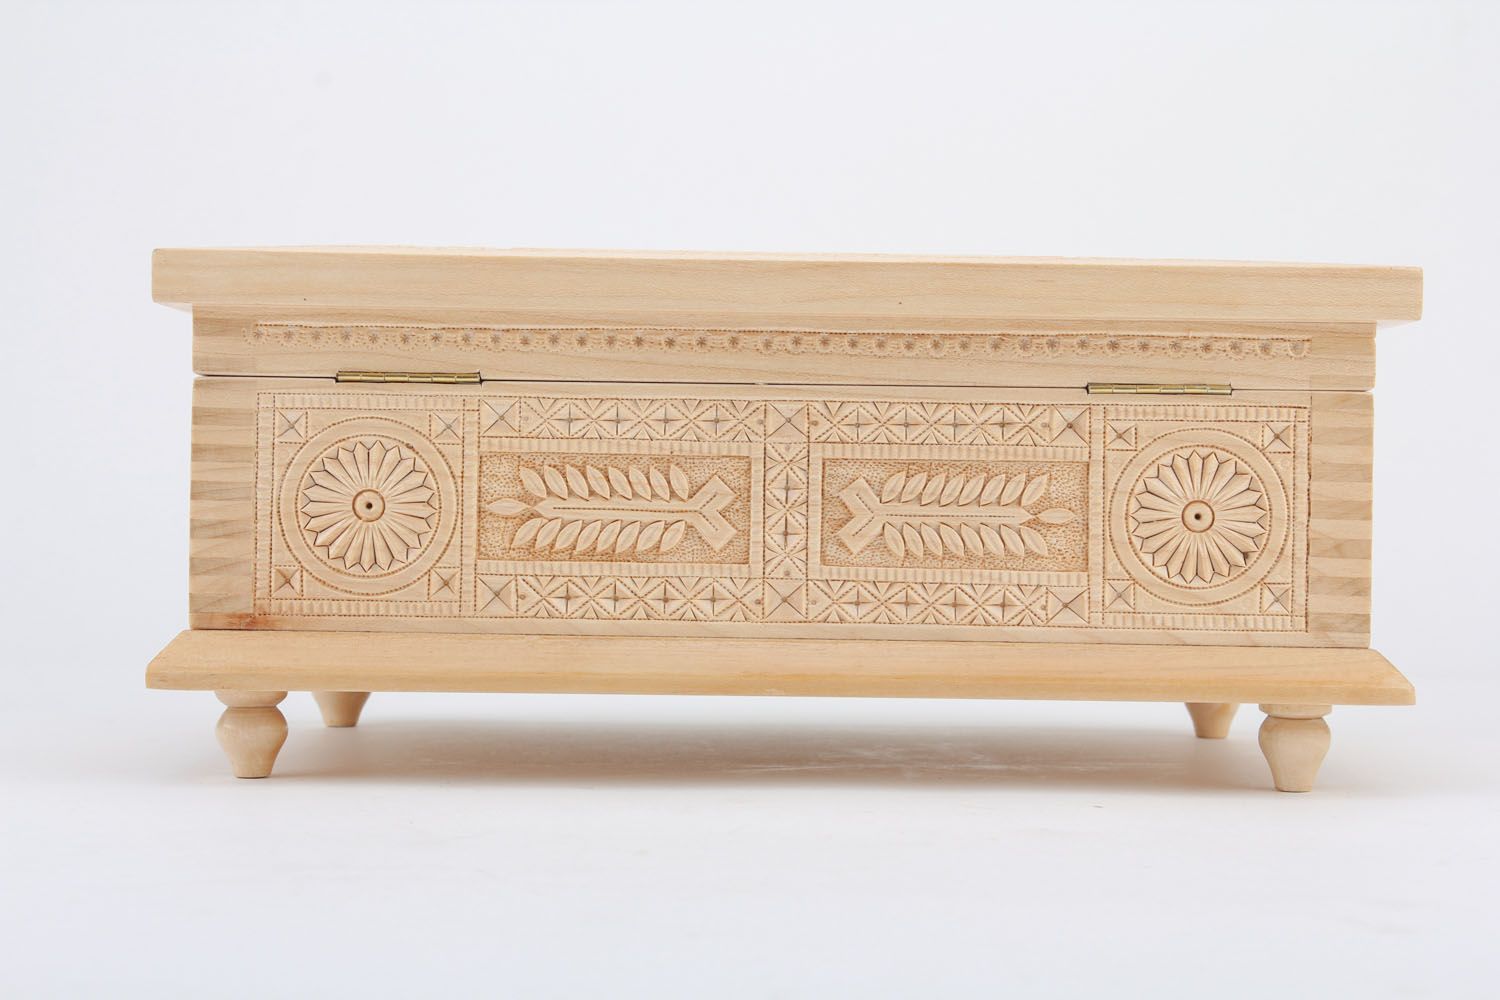 Carved wooden box photo 1